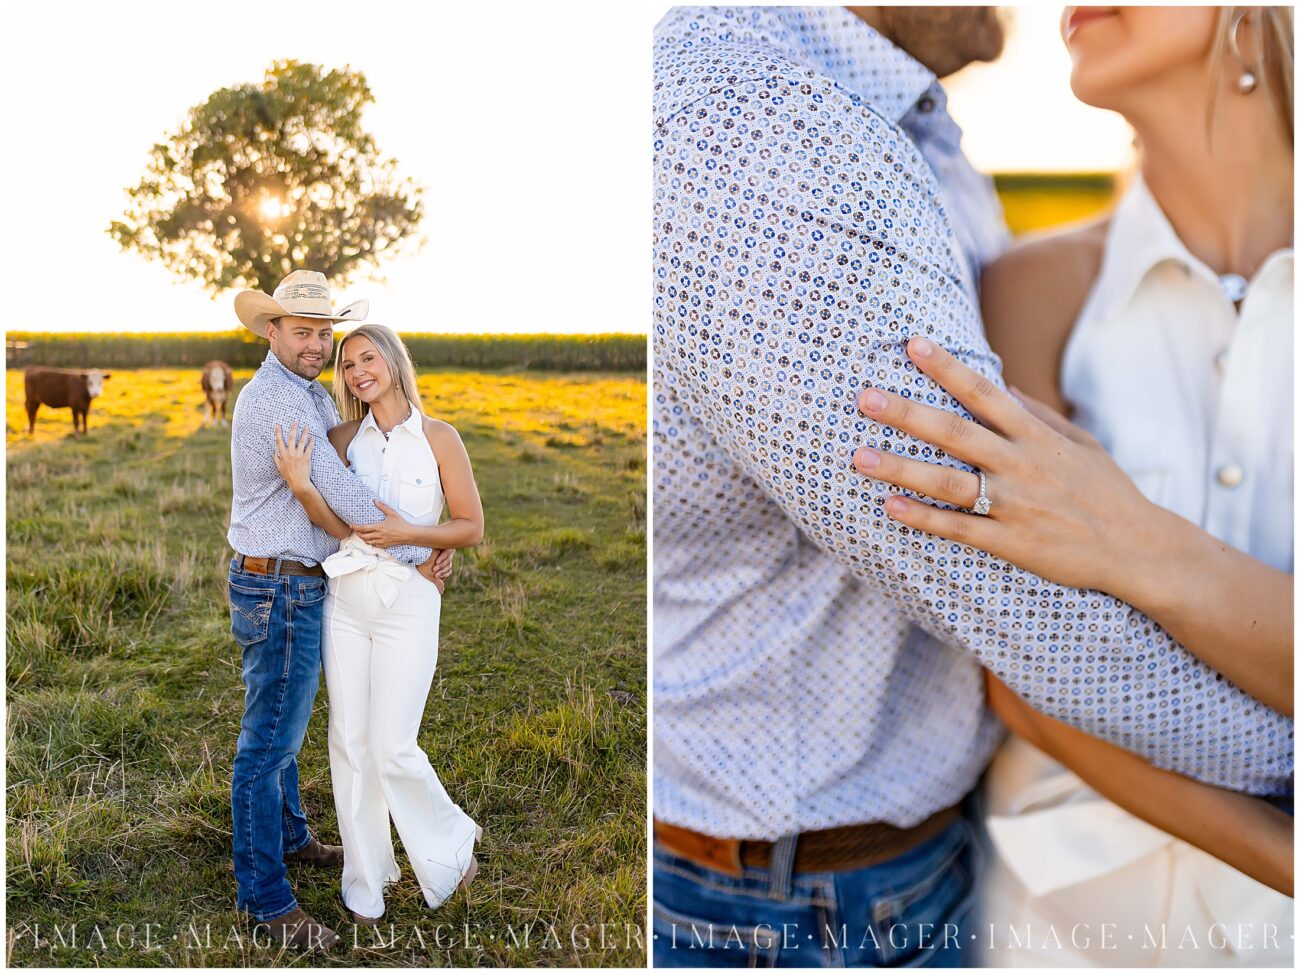 uthentic Love and Chemistry in Wade and Colie's Photos